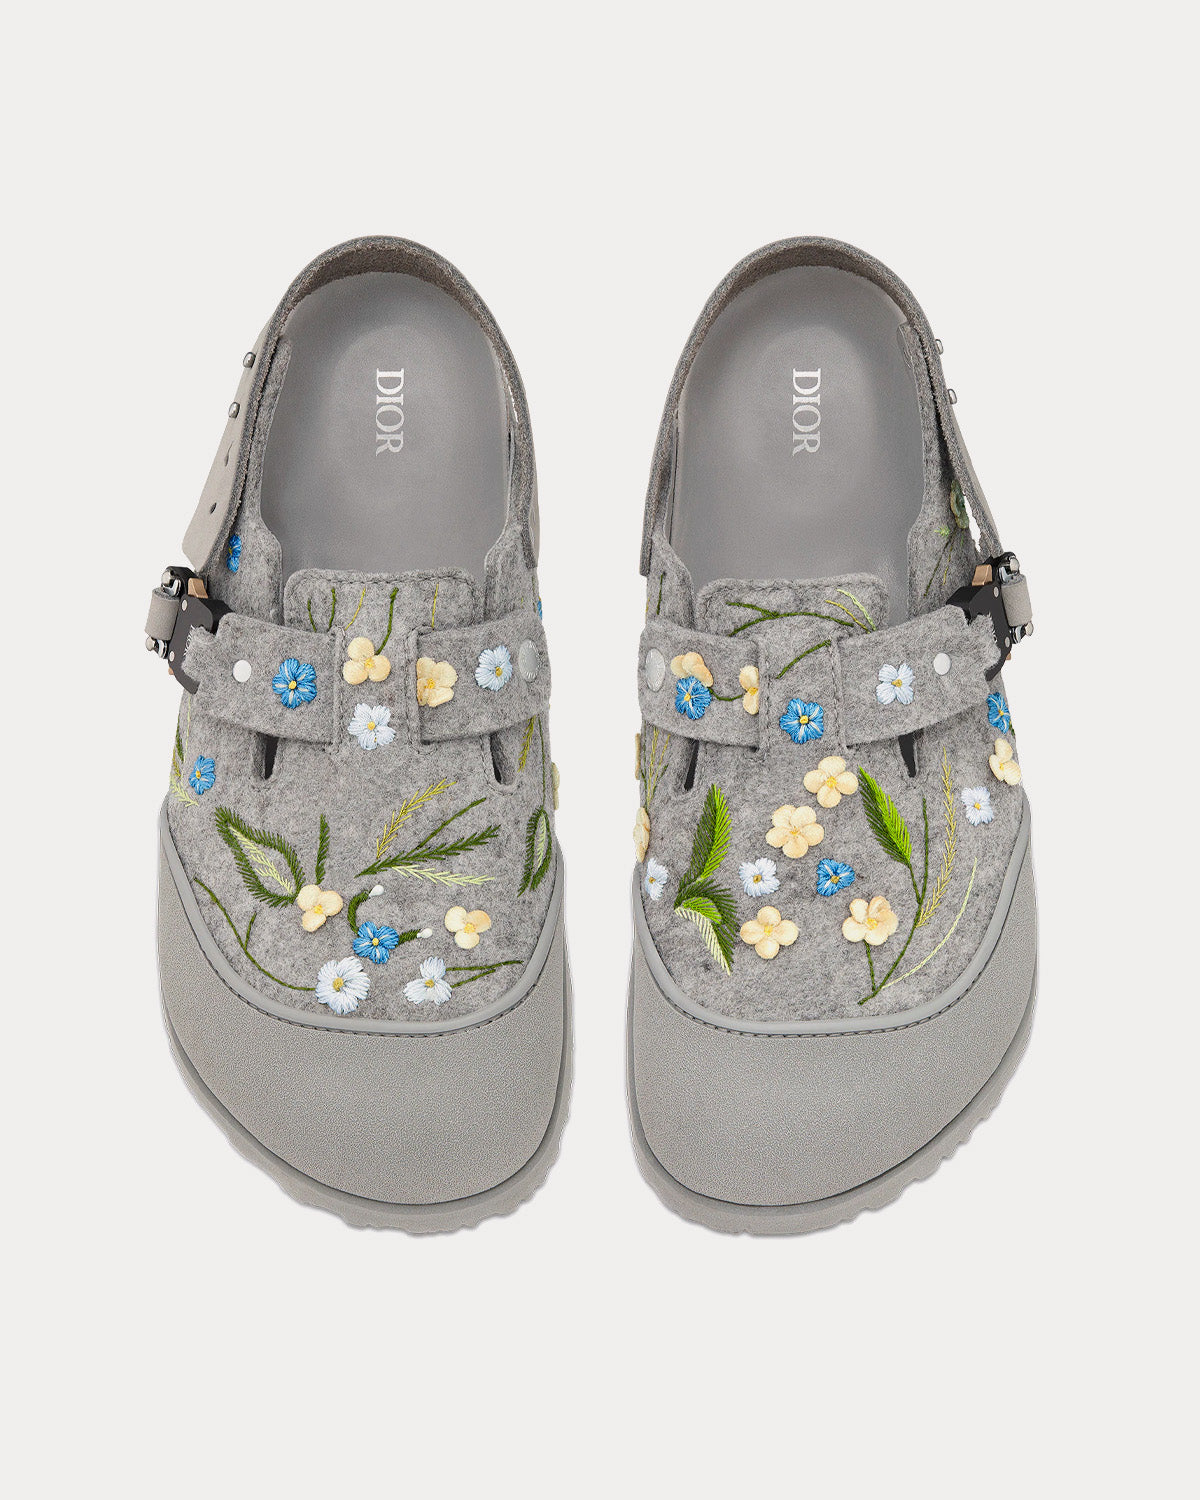 Dior x Birkenstock - Tokio Dior Gray Felted Wool Embroidered with Flowers and Nubuck Calfskin Mules